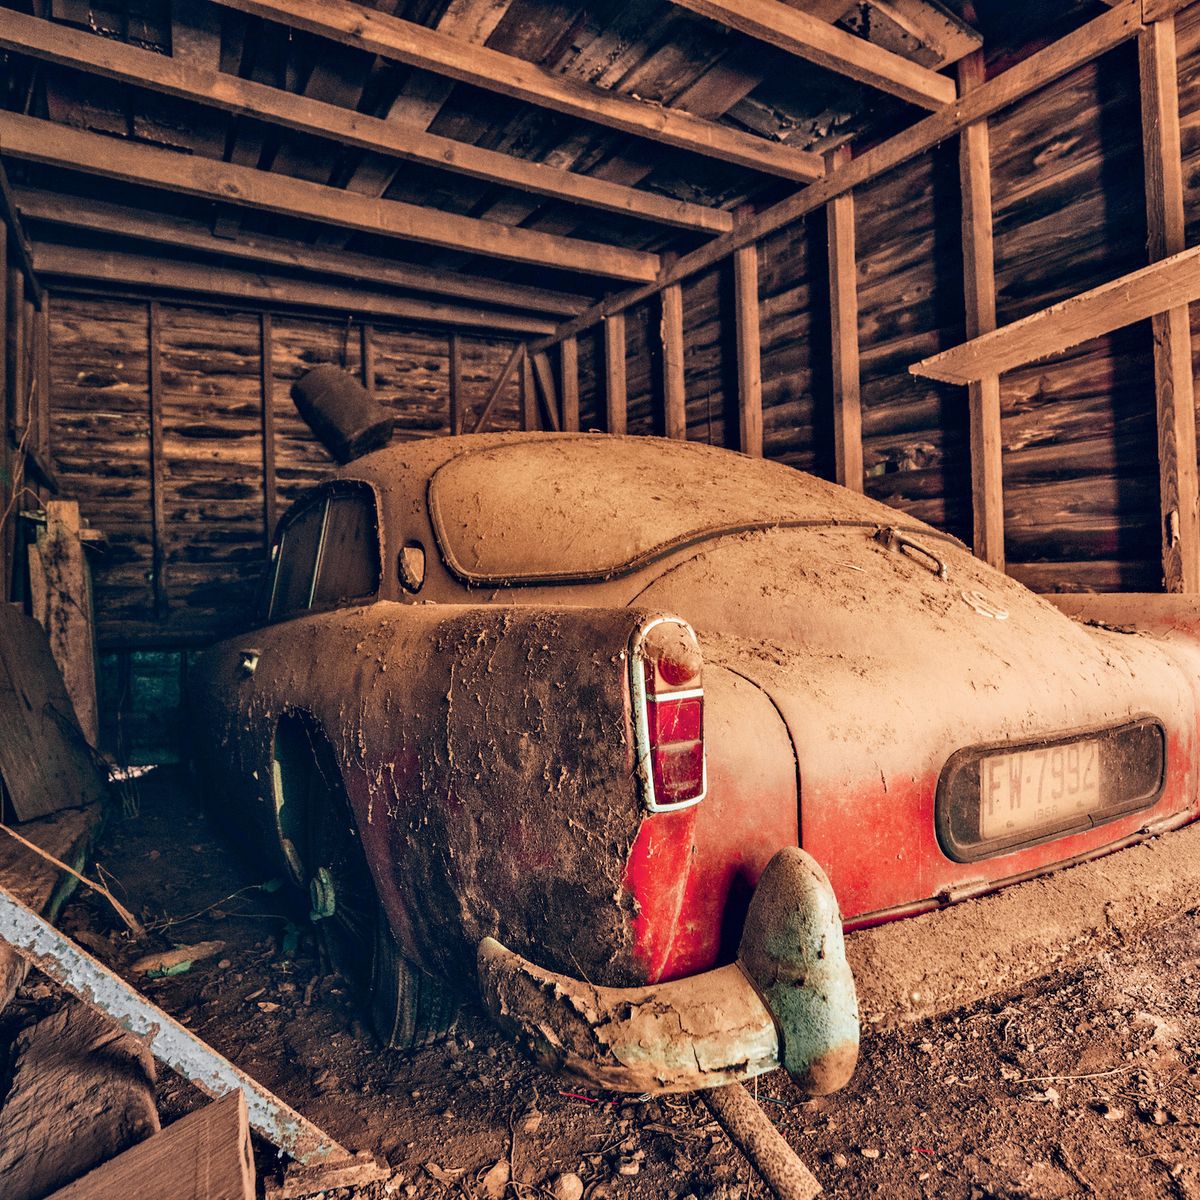 How to Find Barn Finds, And Barn Find Cars For Sale -  Motors Blog